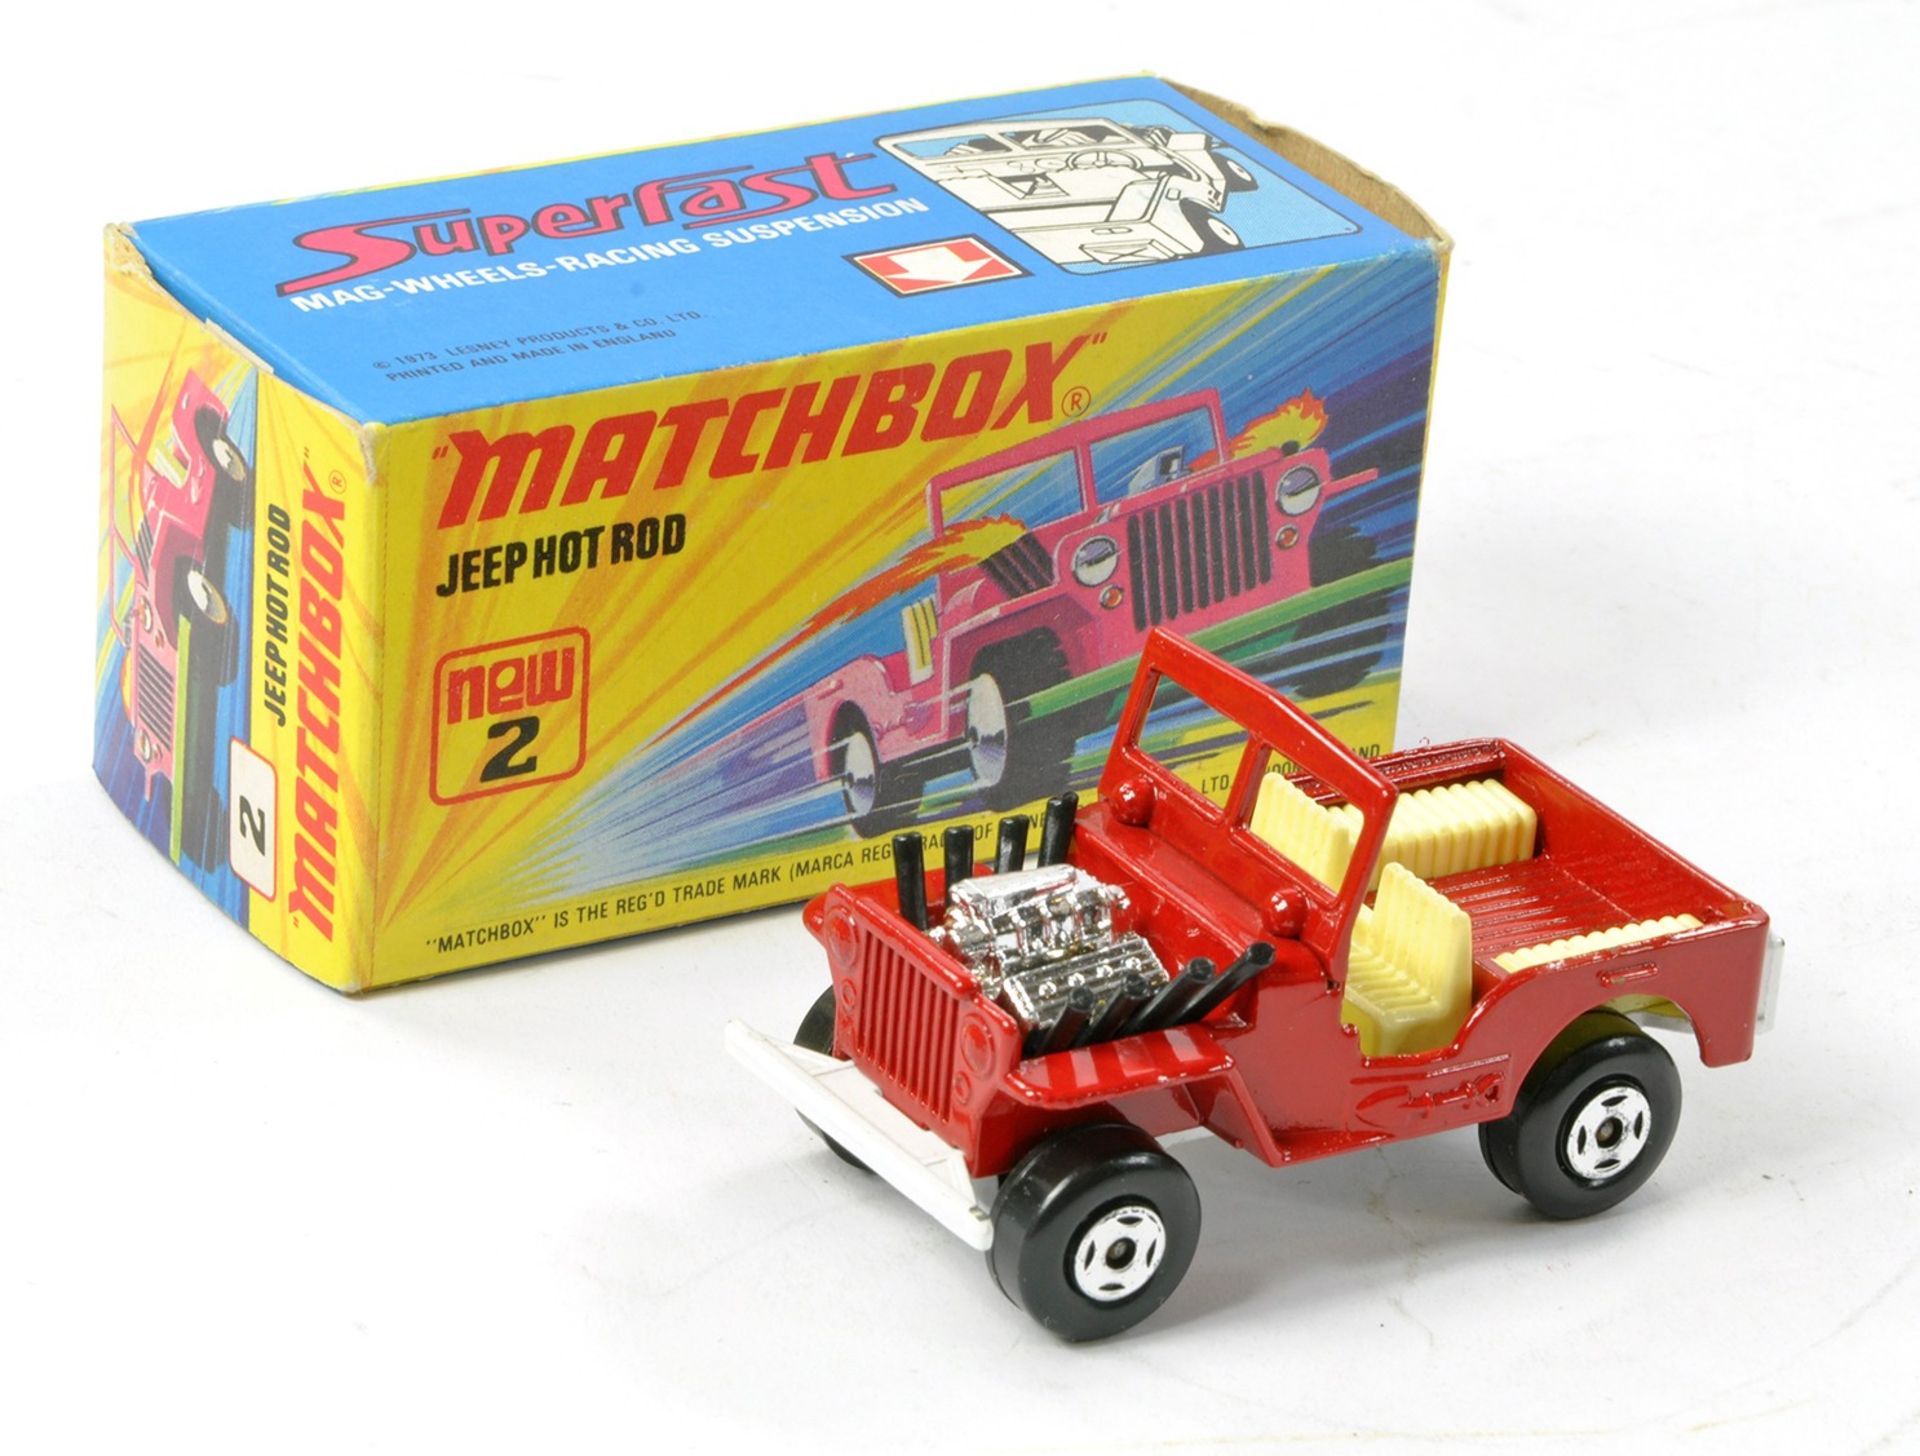 Matchbox Superfast No. 2b Jeep Hot Rod. Red with white base and interior. Excellent, no obvious sign